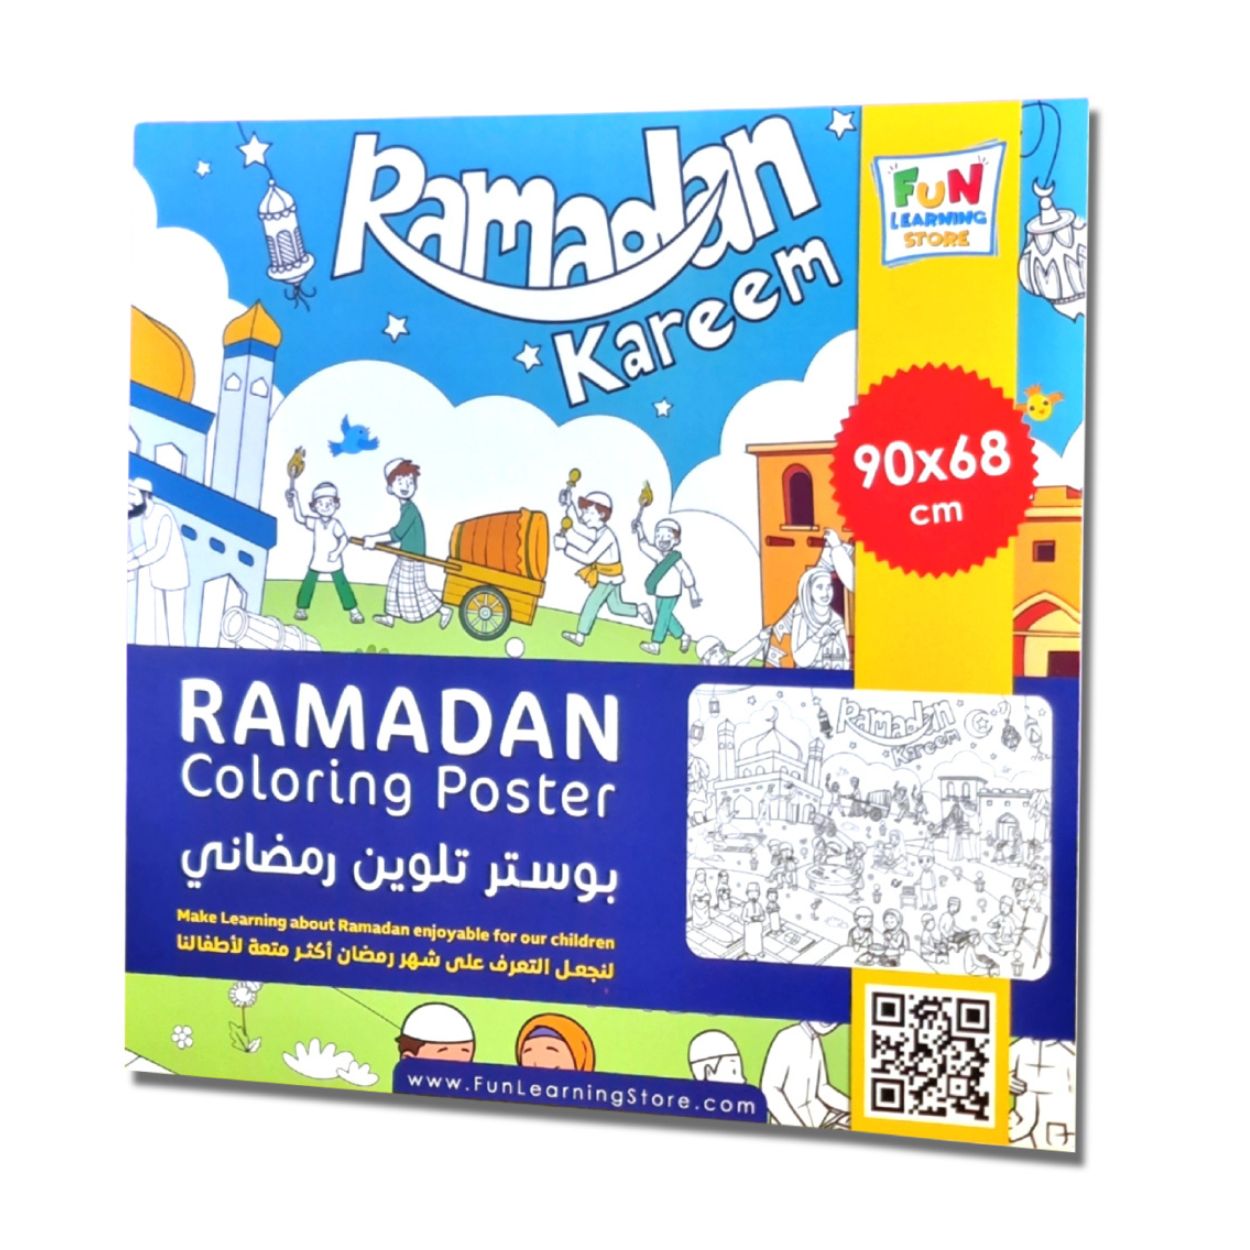 Ramadan Giant Coloring Poster for Kids 90x68 cm